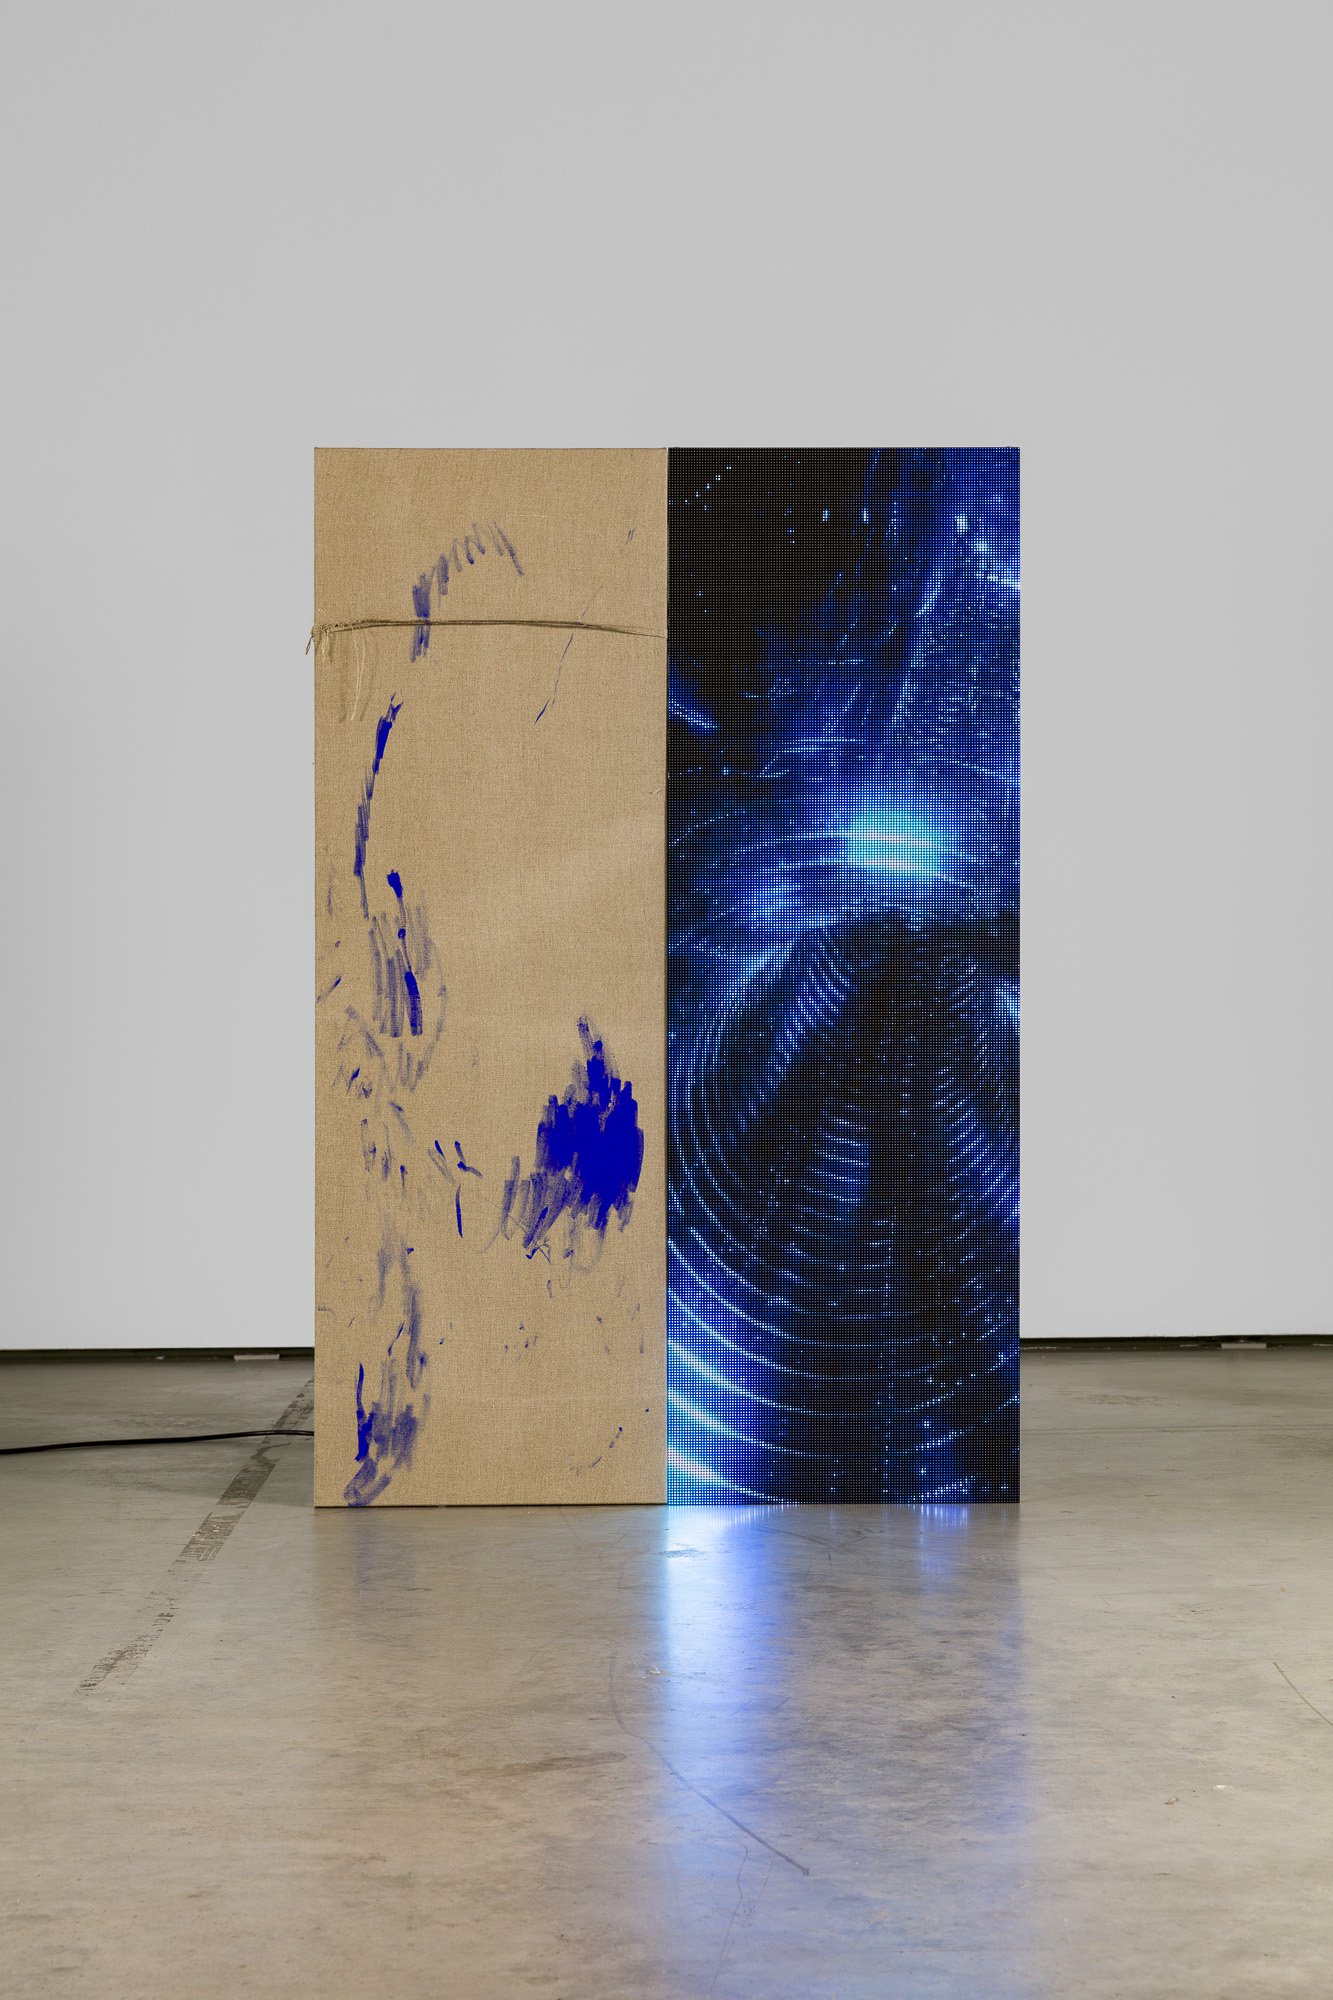 Philipp Timischl Hard workers (Blue &amp; Blue), 2021 Incredibly Kleinish Blue on linen, LED Panels, metal truss, media playerVideo 4’27&#x27;&#x27;, 150 x 100 x 50 cm